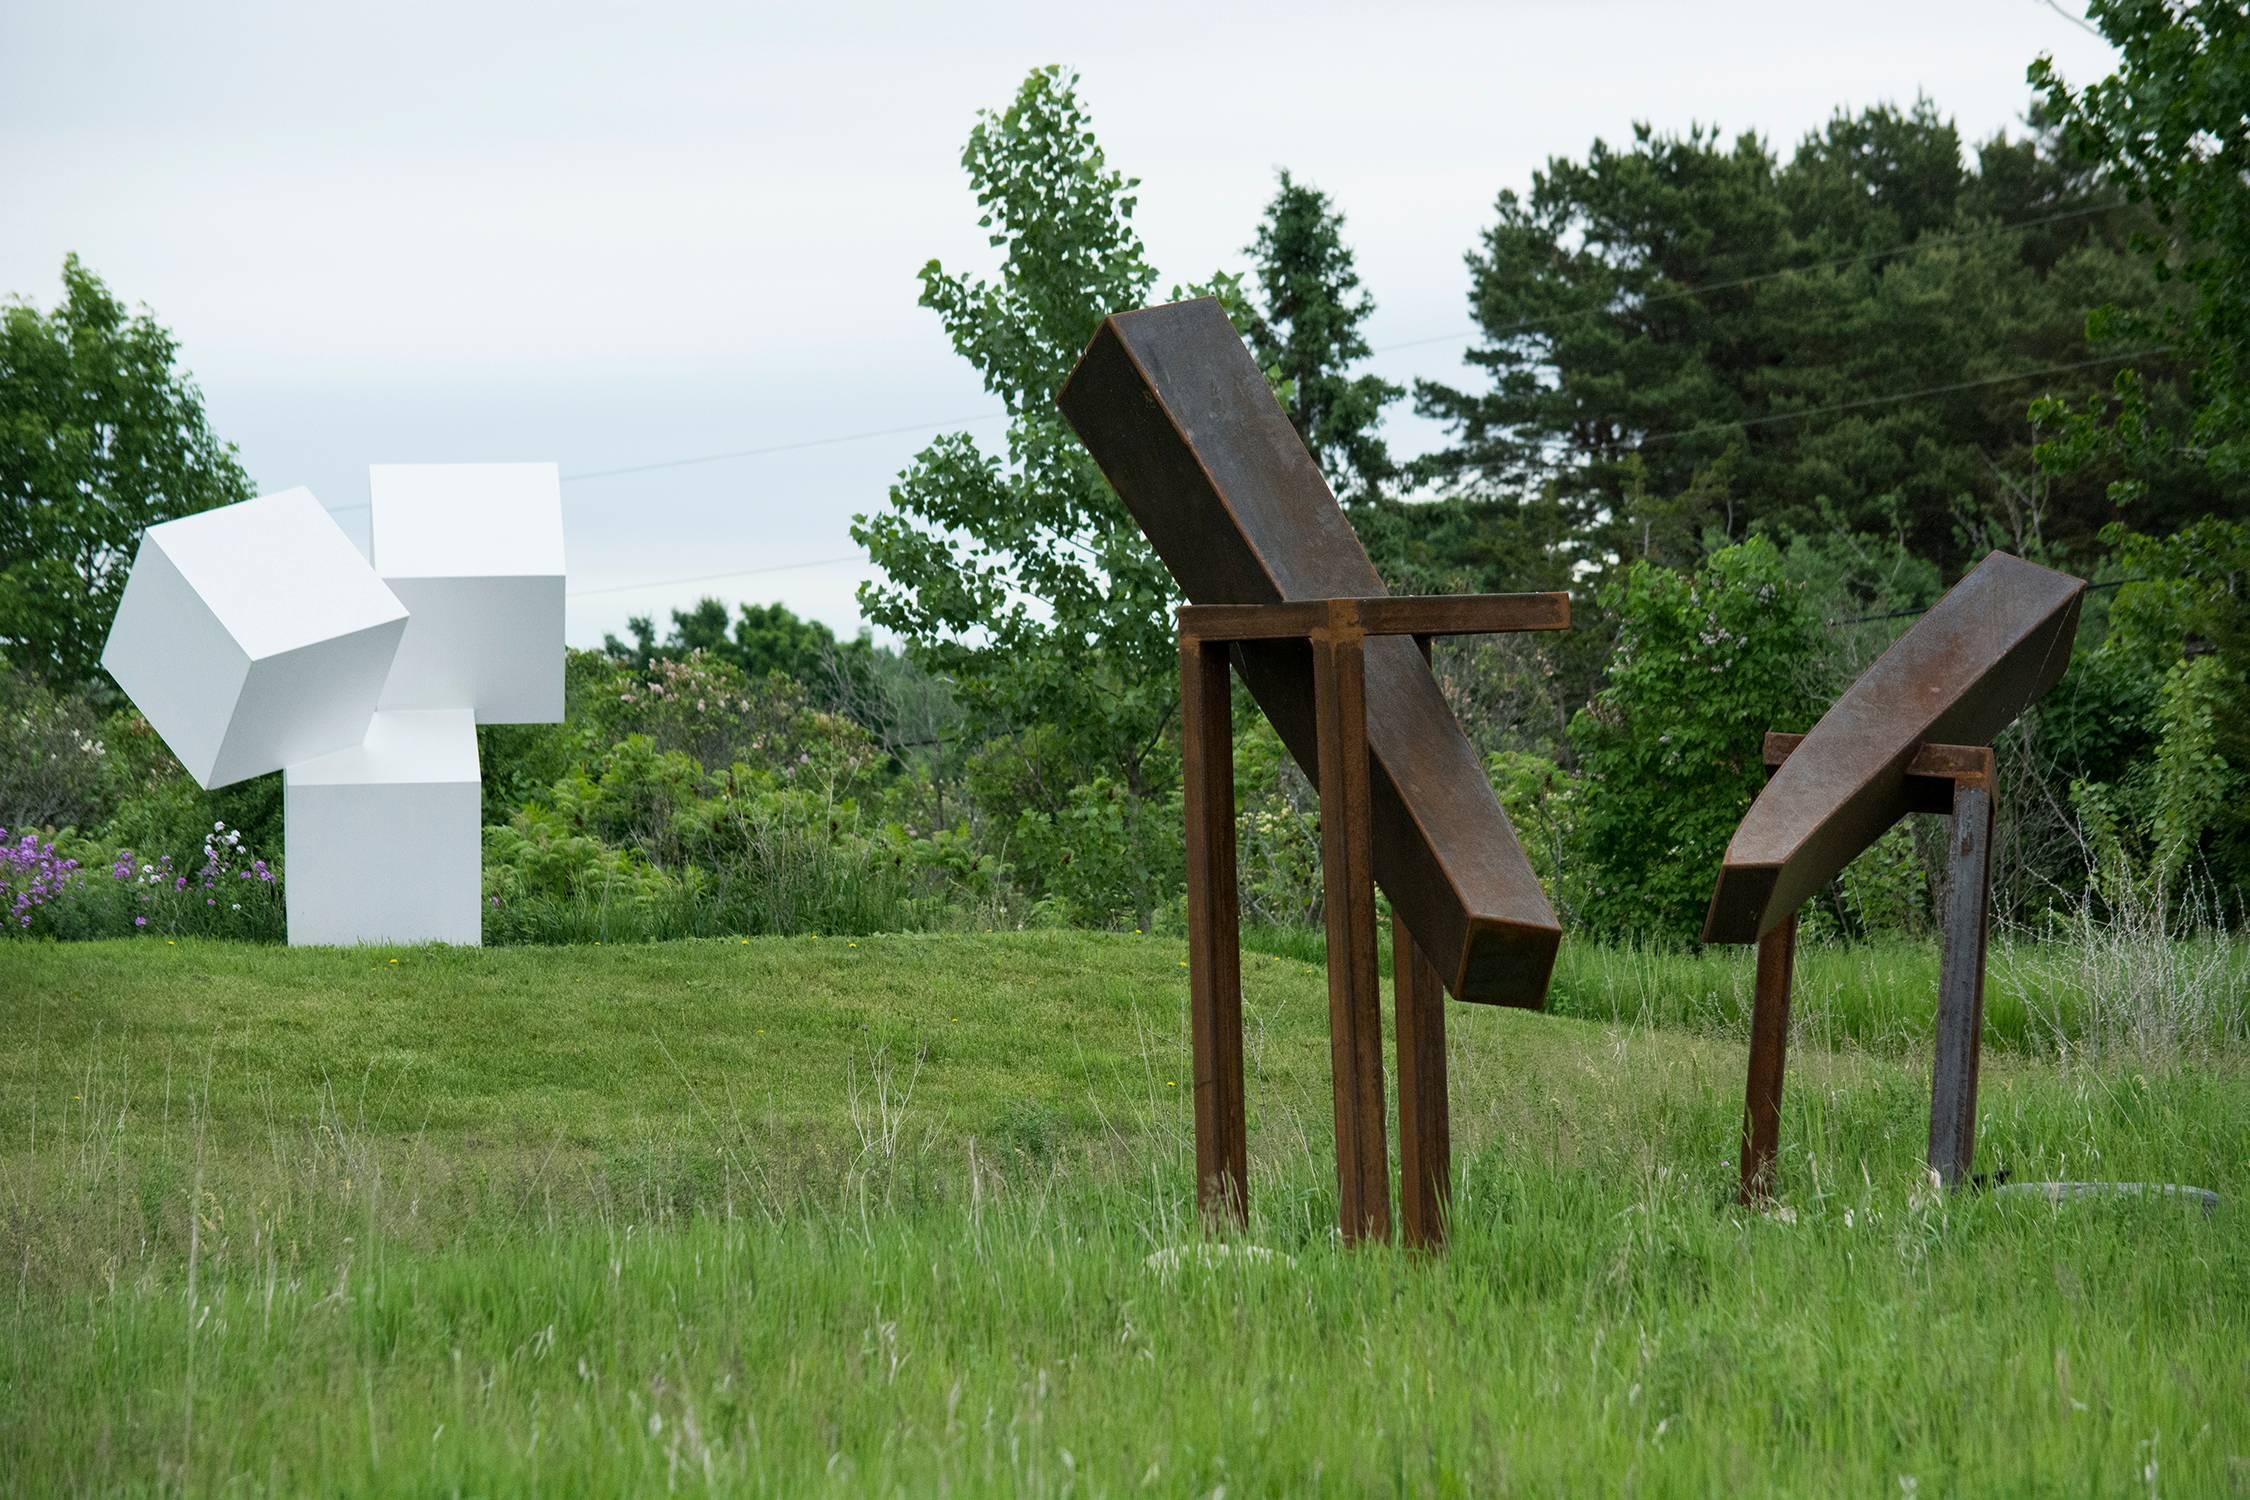 In this dynamic sculpture by artist Claude Millette corten steel is shaped into a right-angled curve and sits on a narrow stand. Corten steel, in time, will naturally rust but maintains its integrity. 

Millette’s work is always non-figurative and